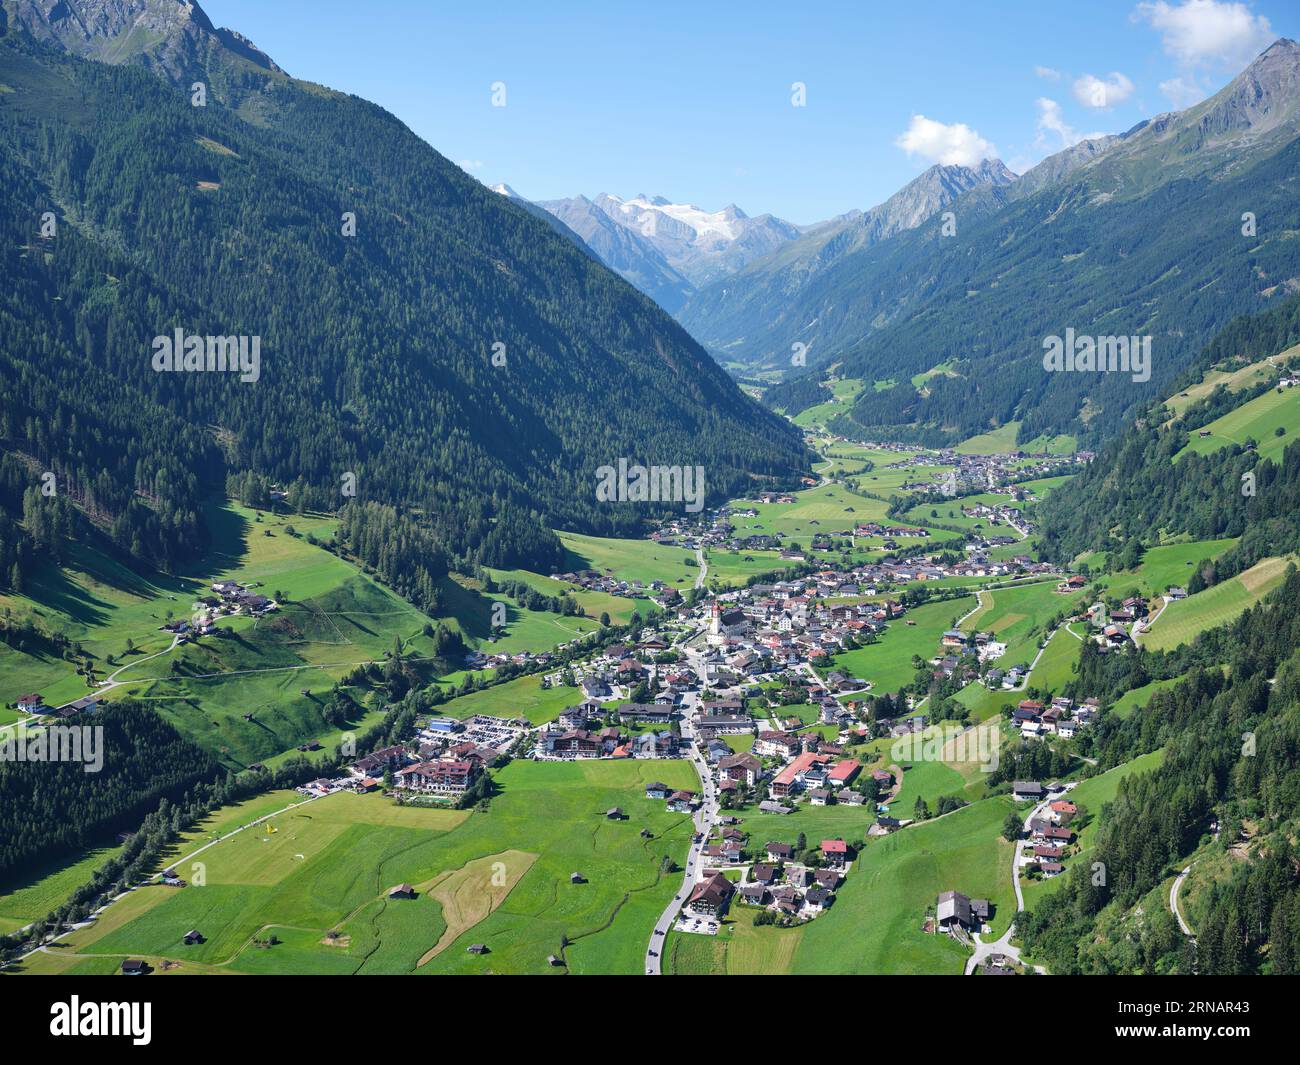 AERIAL VIEW. The Stubai Valley with Neustift im Stubaital and, in the distance, the Zuckerhütl (3507m) and the Sulzenauferner glacier. Tyrol, Austria. Stock Photo